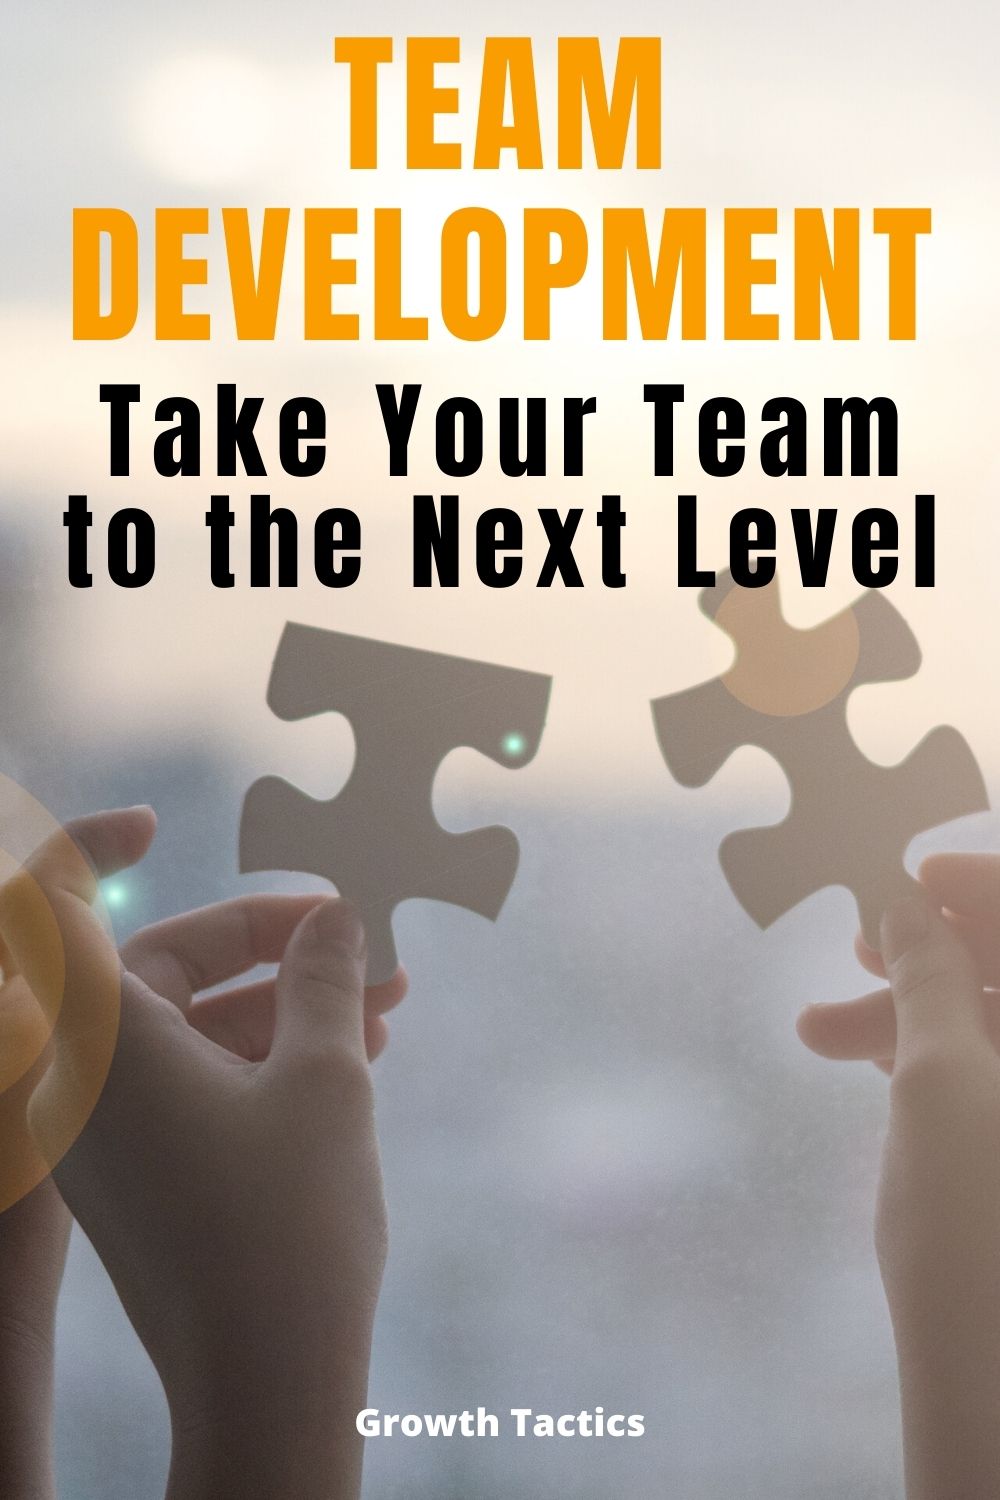 The 5 Stages of Team Development: Group Development Tactics for a Strong Team